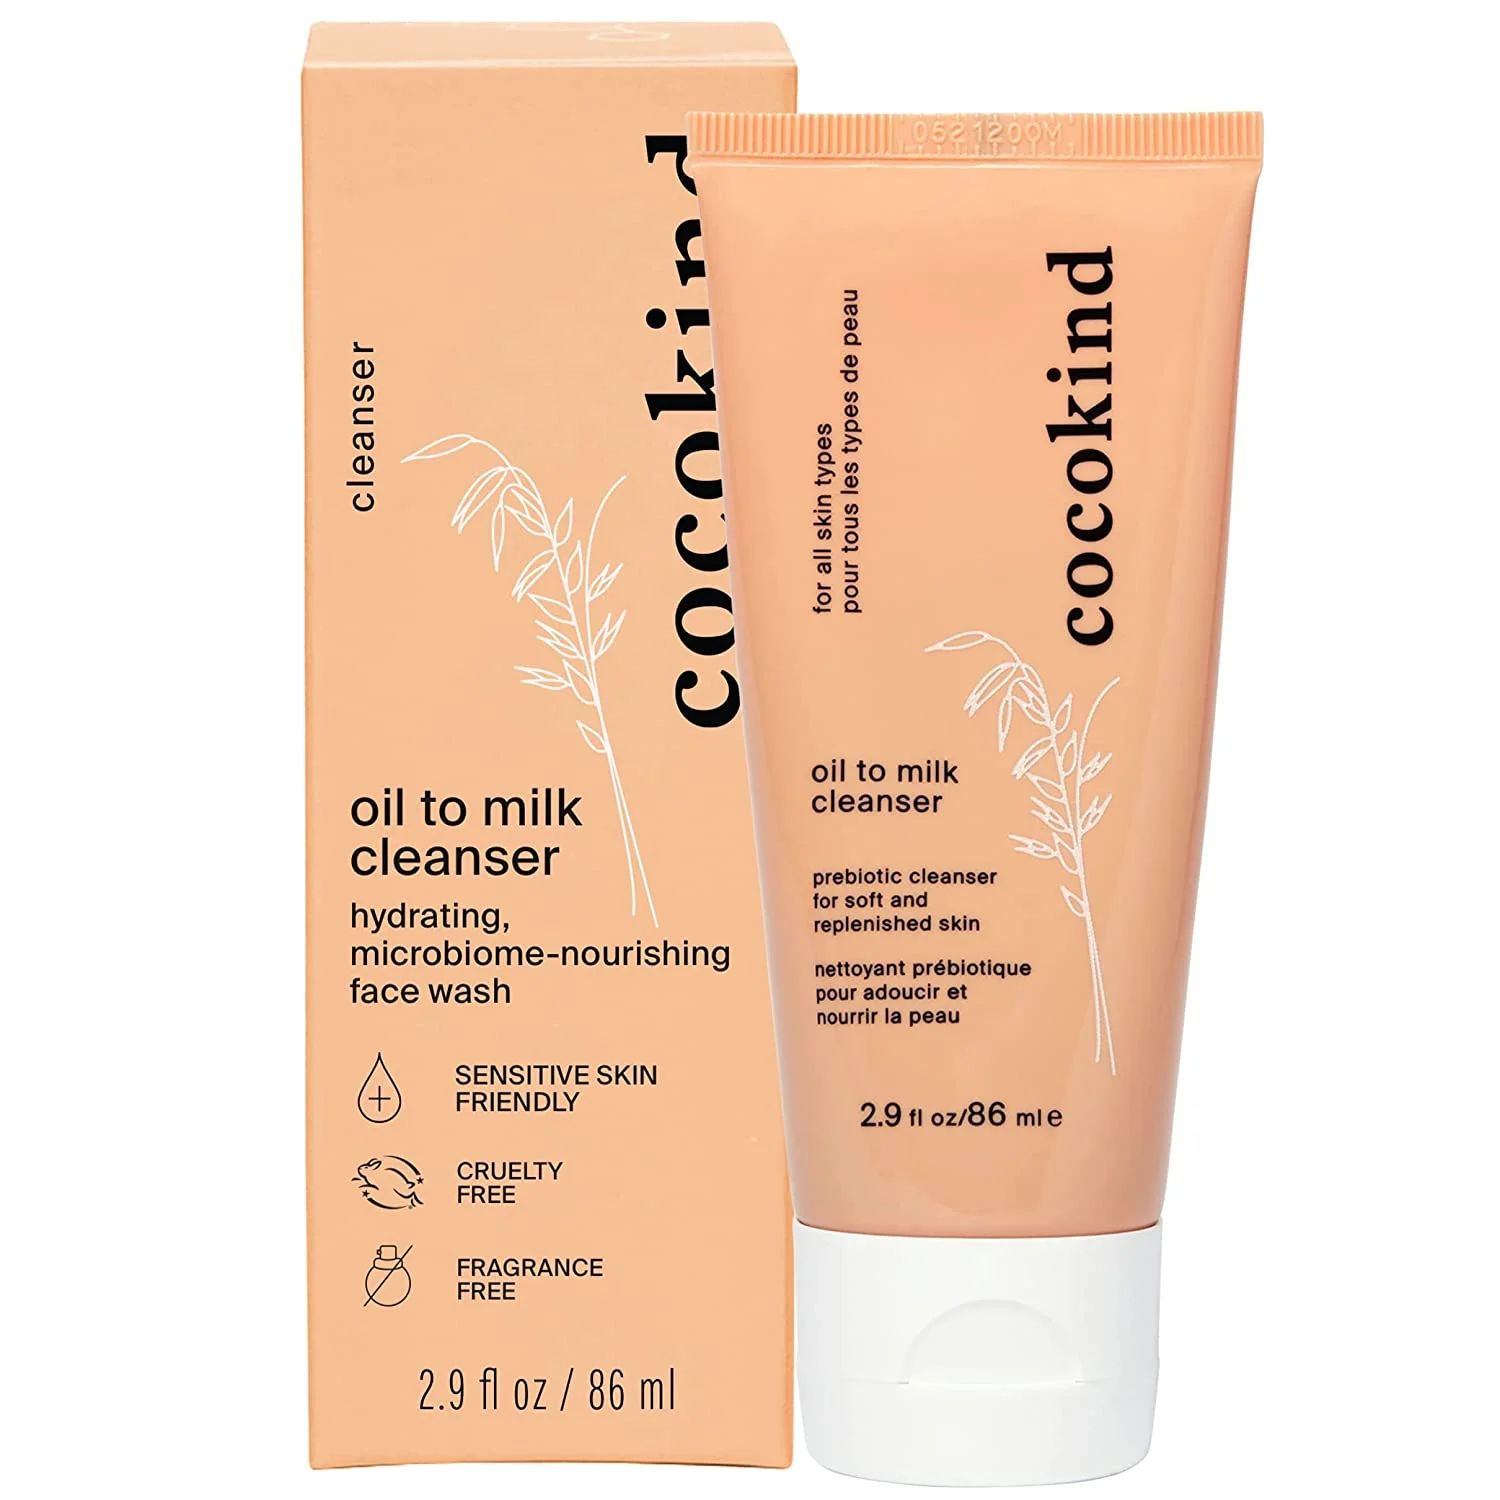 Cocokind Oil to Milk Cleanser Hydrating Face Wash and Makeup Remover, 2.9 oz | Walmart (US)